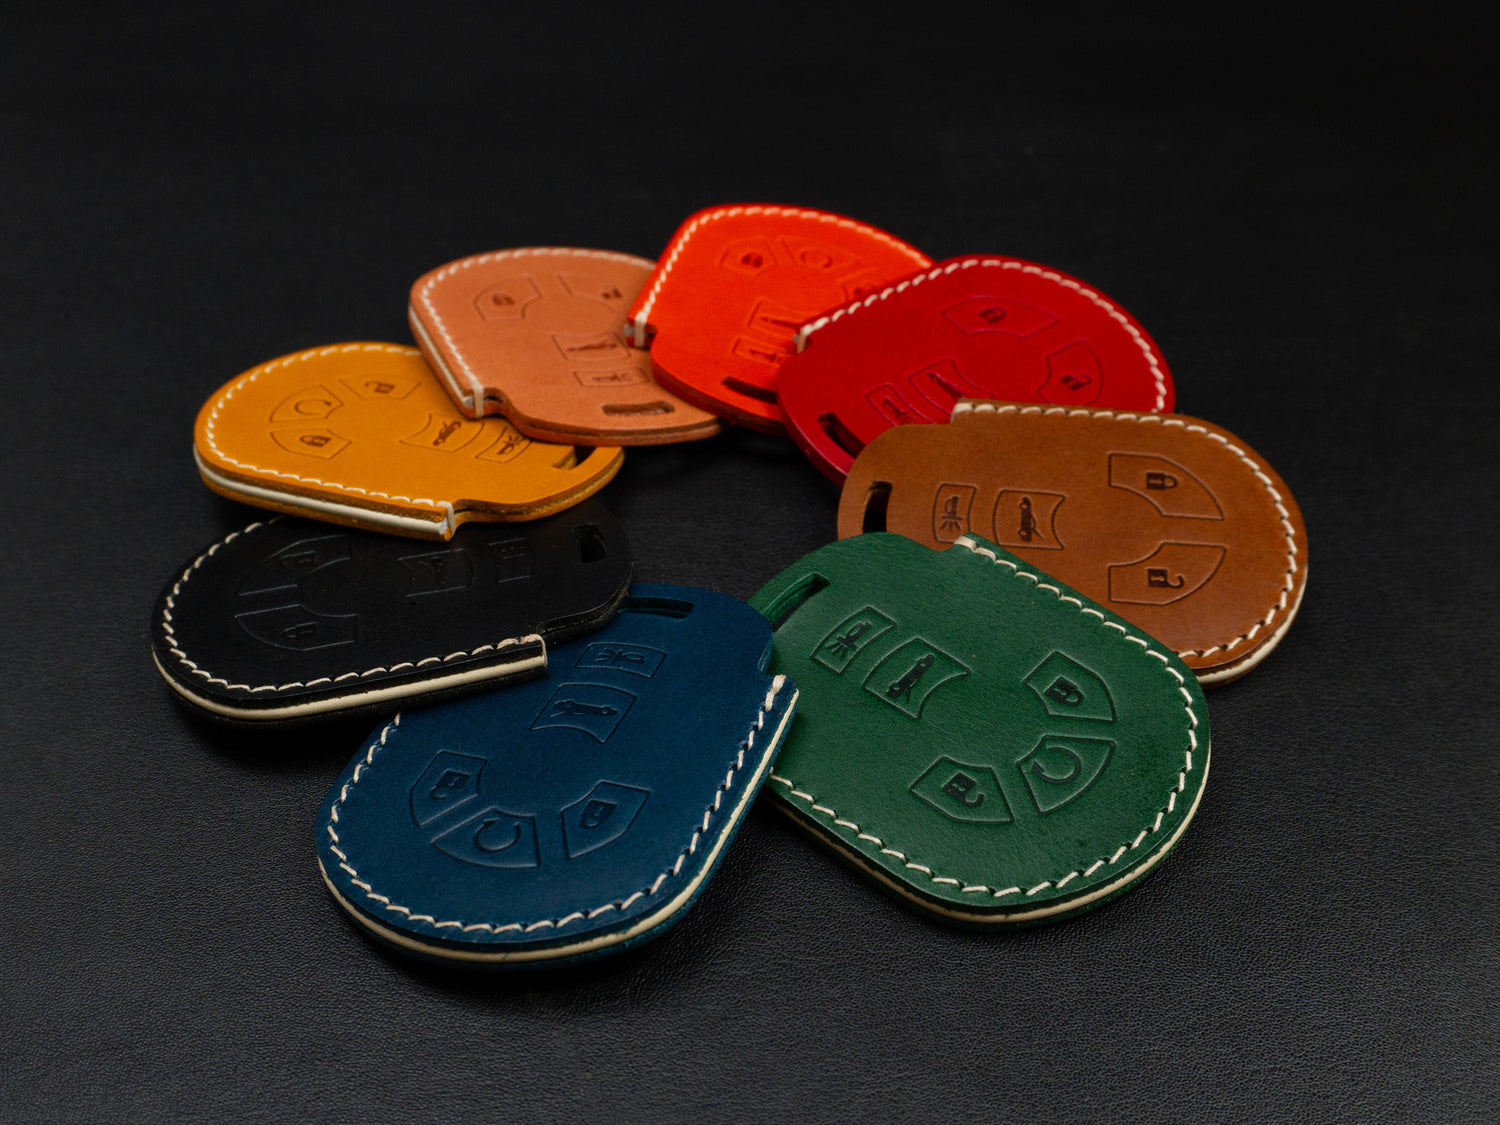 Chevy Corvette Series [2] Key Fob Leather Case - Italian Veg-Tanned Leather - Handcrafted in USA